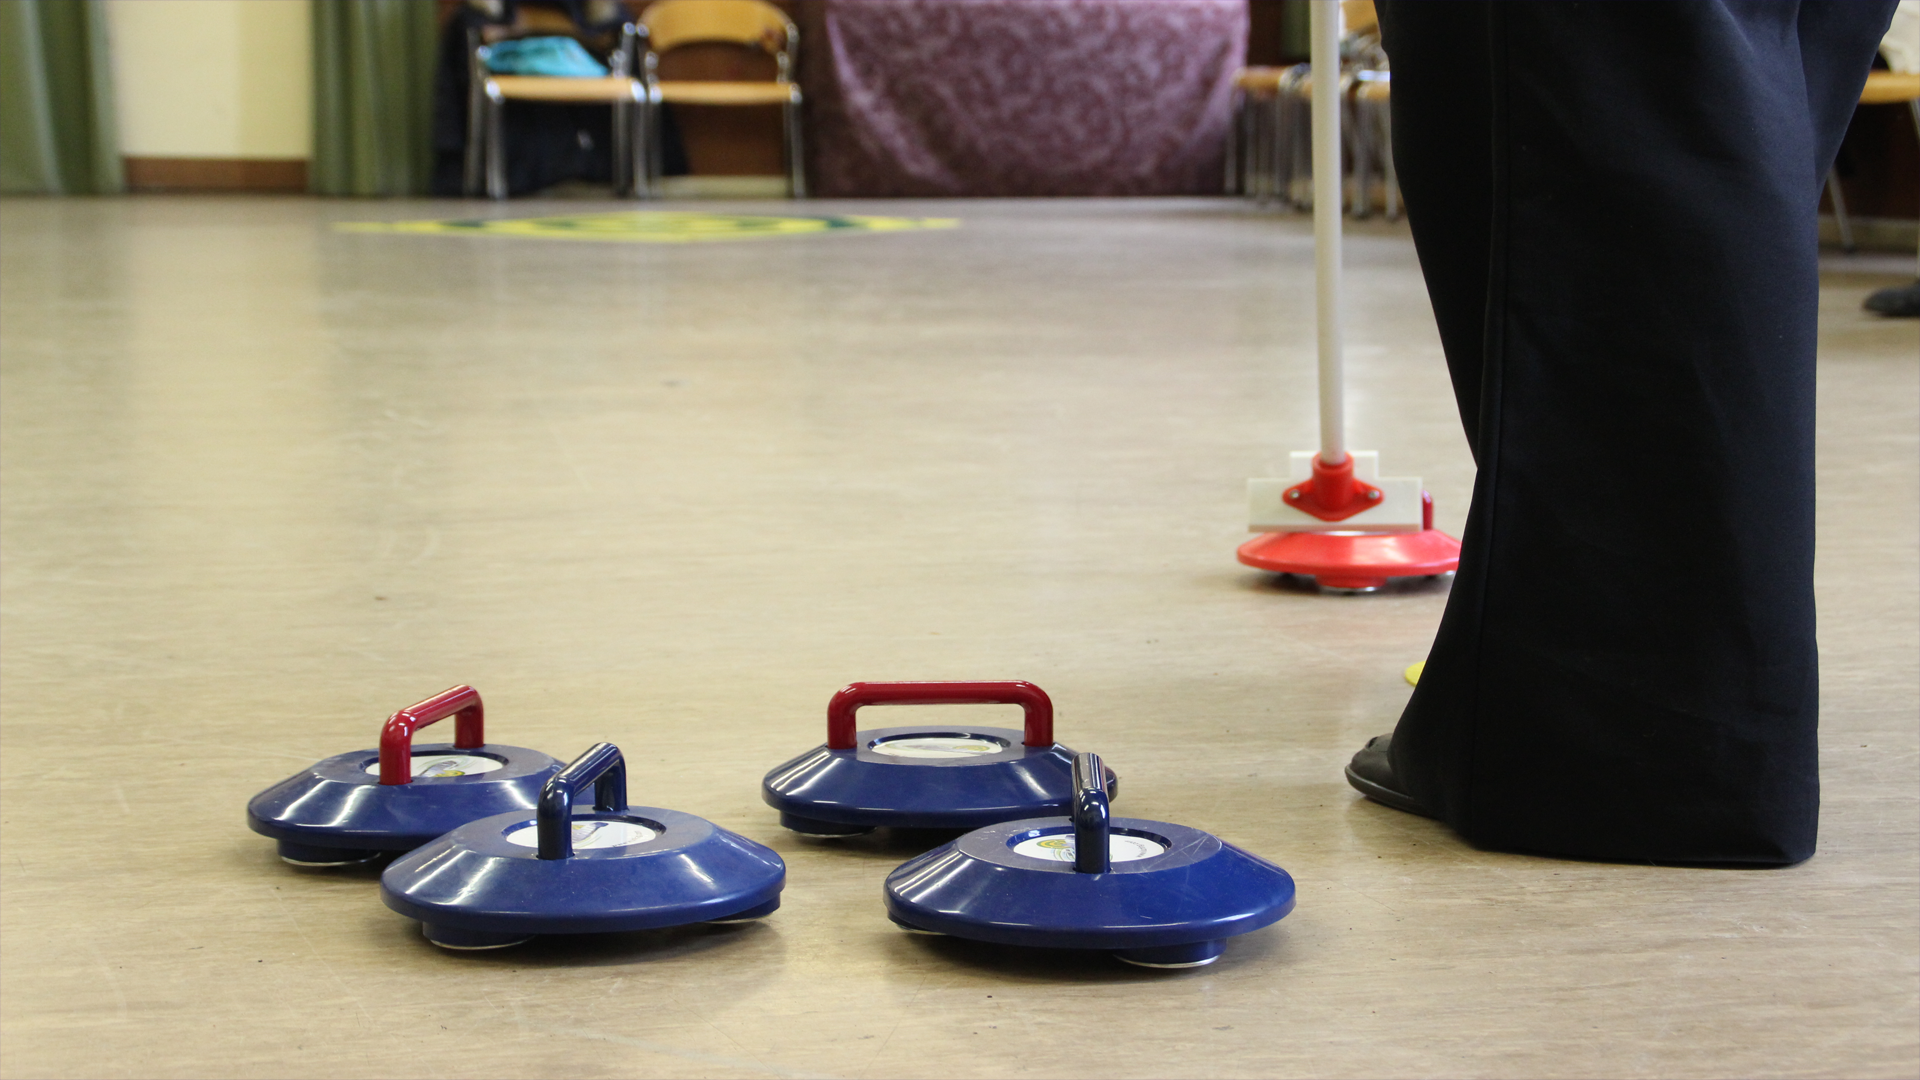 4 blue Kurling irons can be seen on the ground, a person wearing a black pair of trouser and a brush.